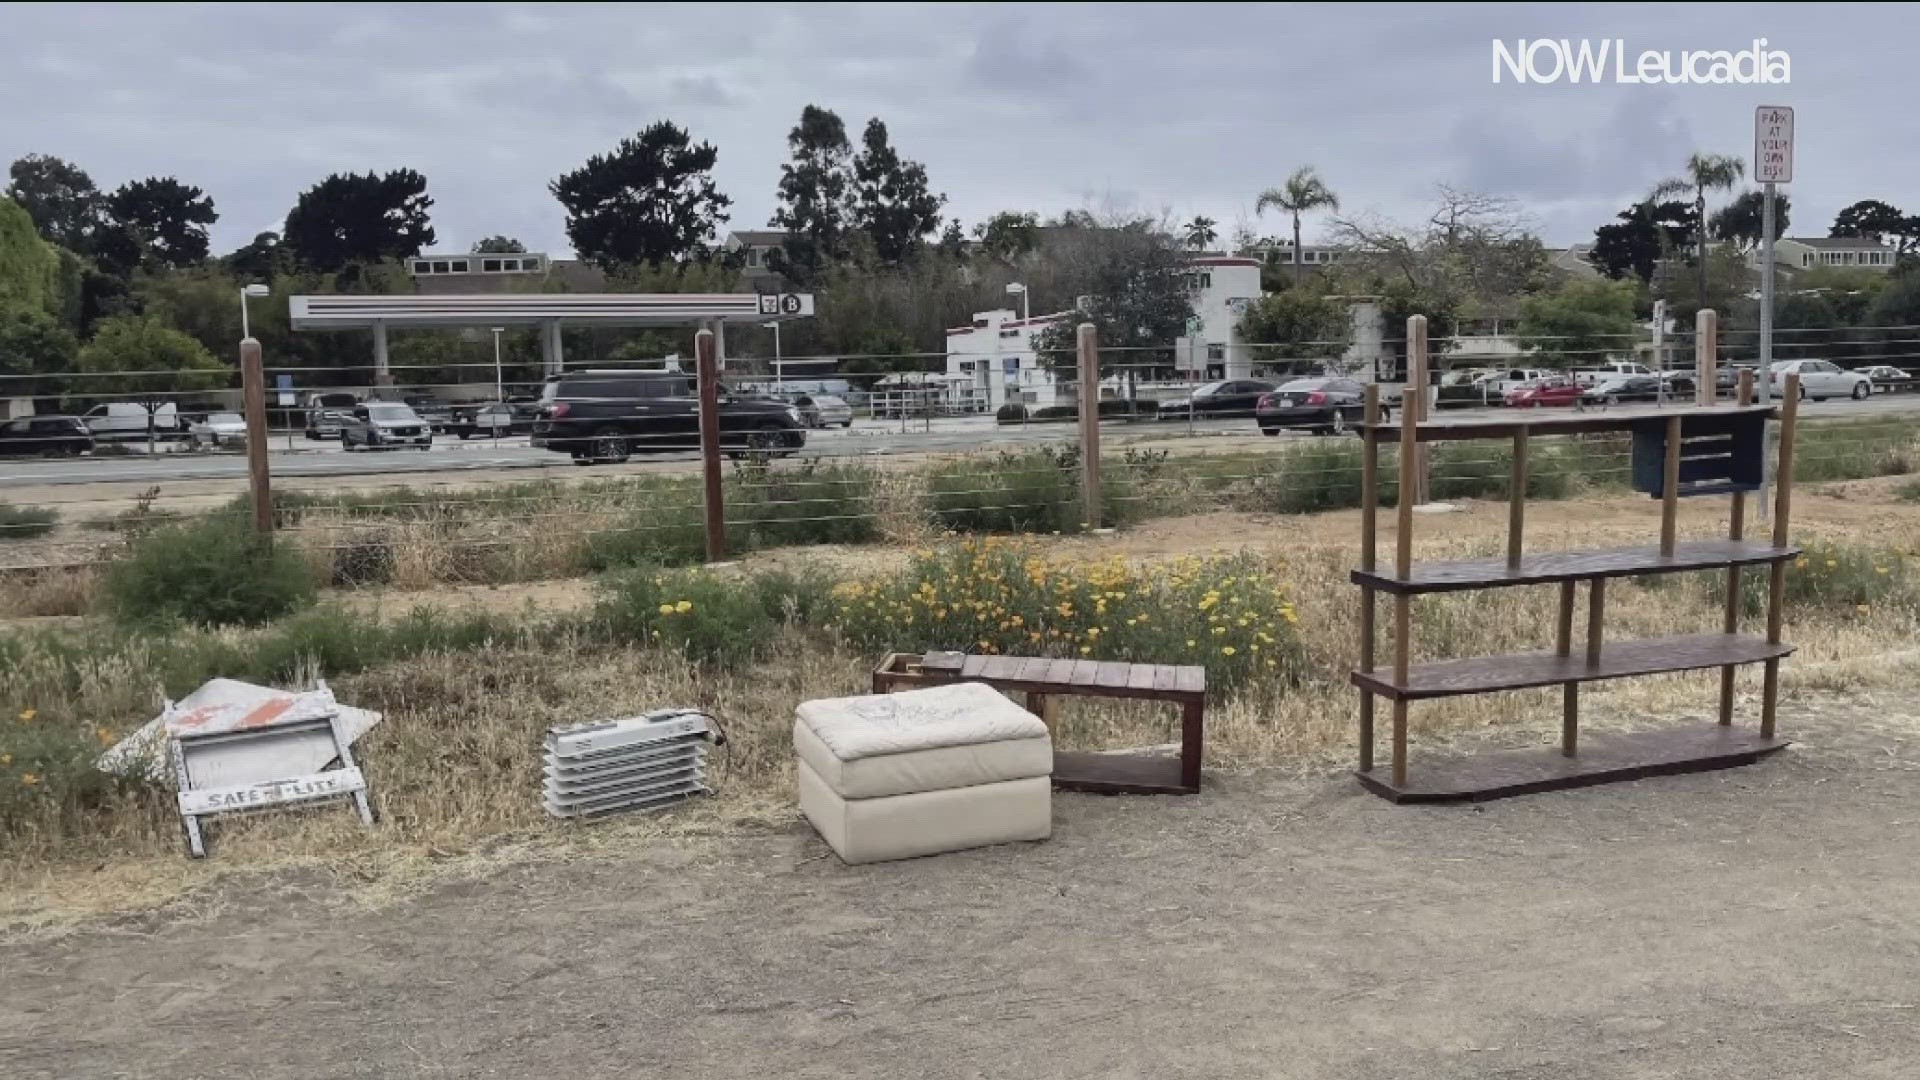 A new parking configuration in Encinitas has neighbors at odds. CBS 8 spoke with both supporters and naysayers about the impact this will have on the community.